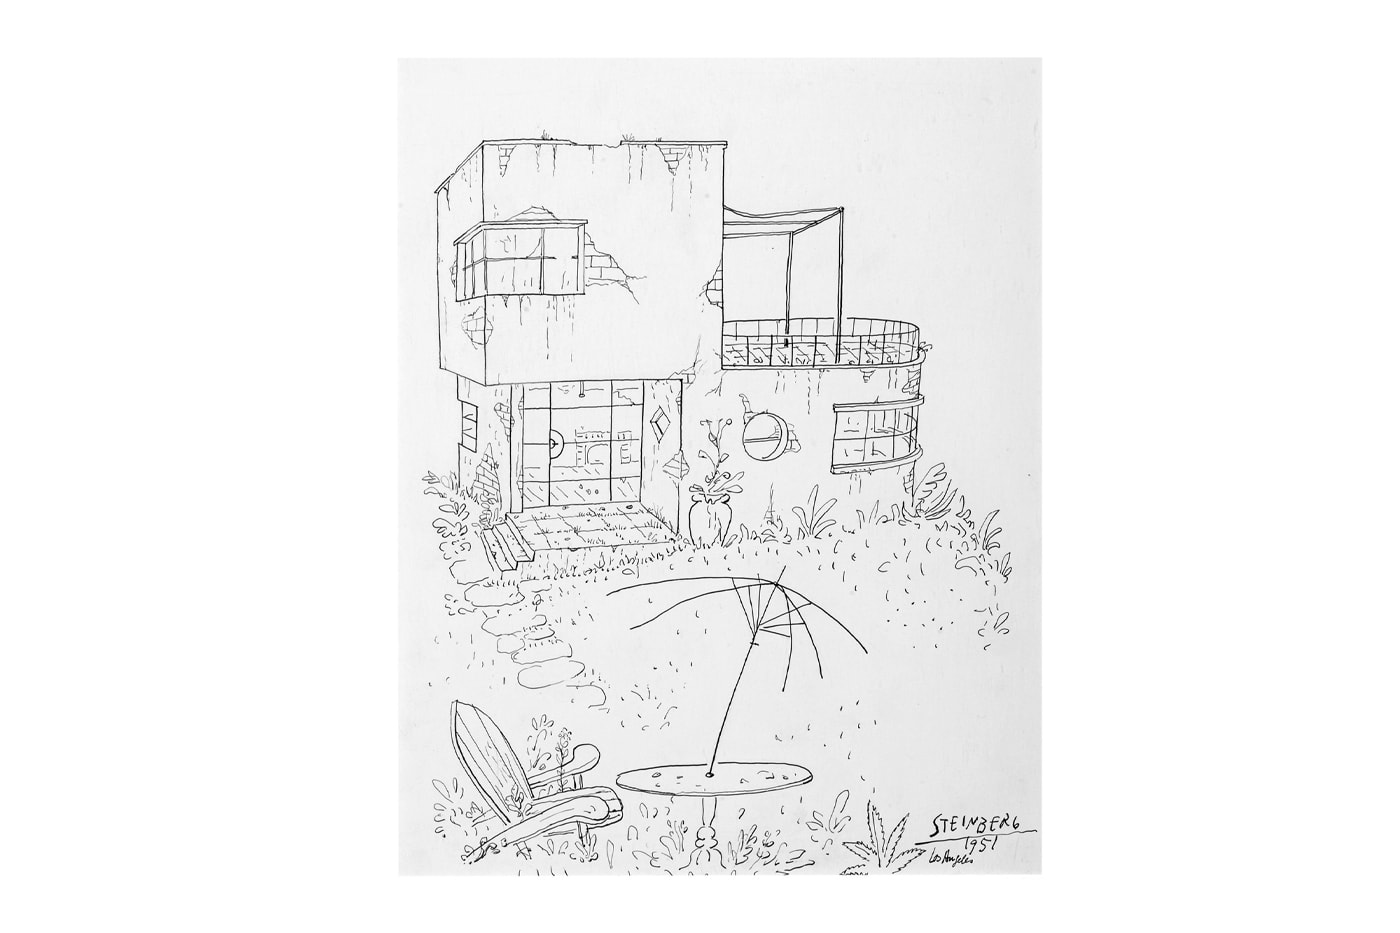 Saul Steinberg Eames Institute Online Exhibit 8 Charles and Ray Eames Case Study House Info